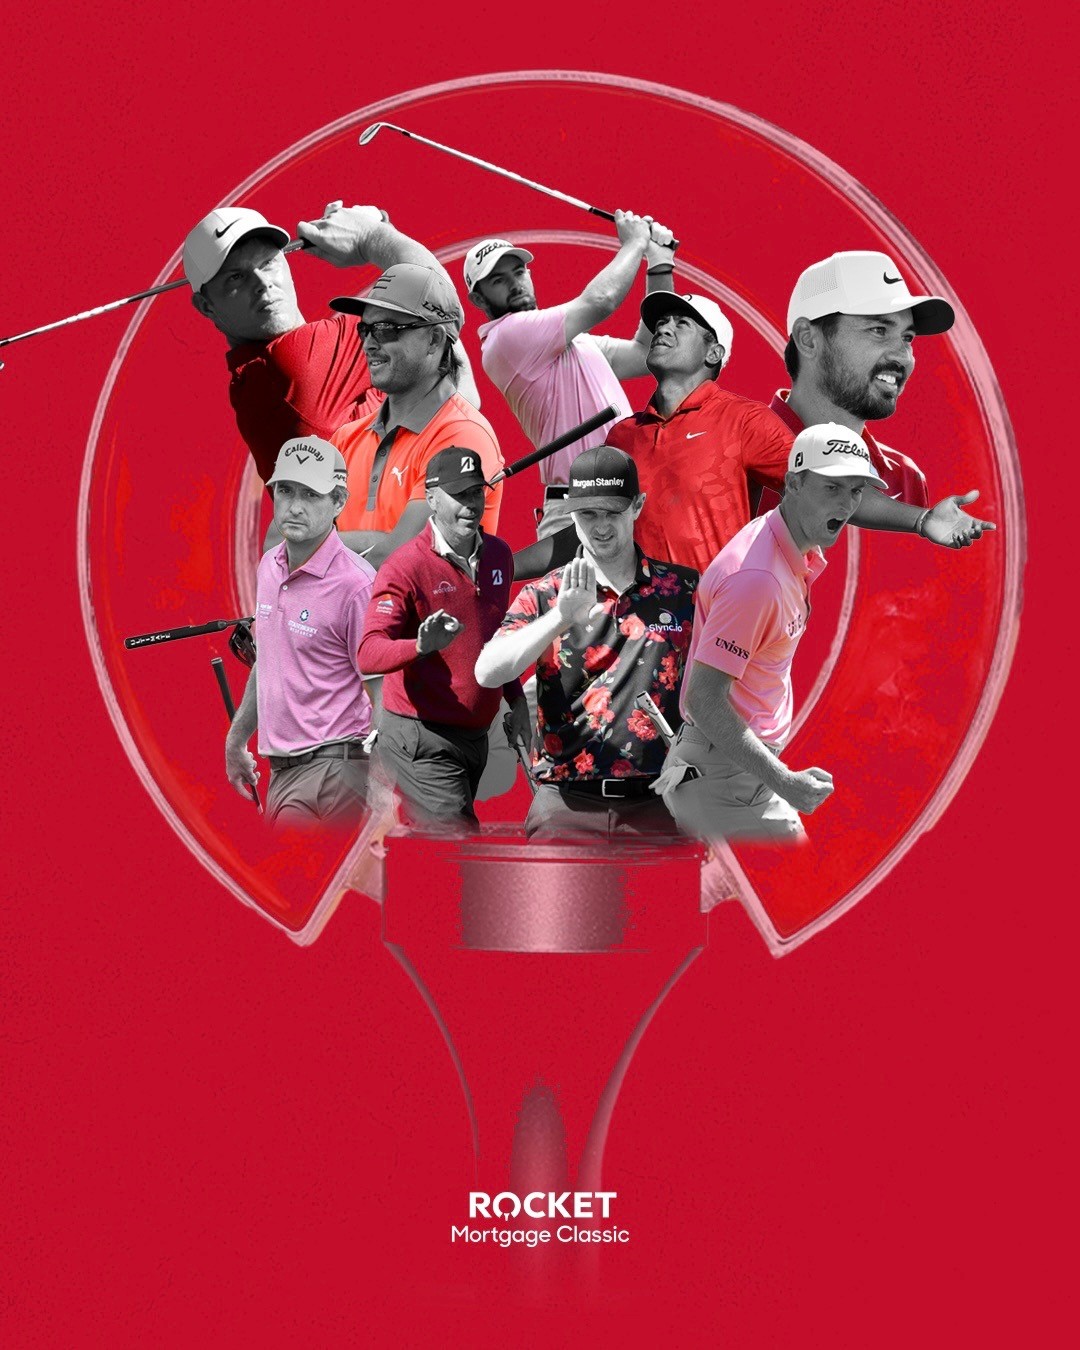 Nine golfers are featured on a red graphic for the Rocket Mortgage Classic.